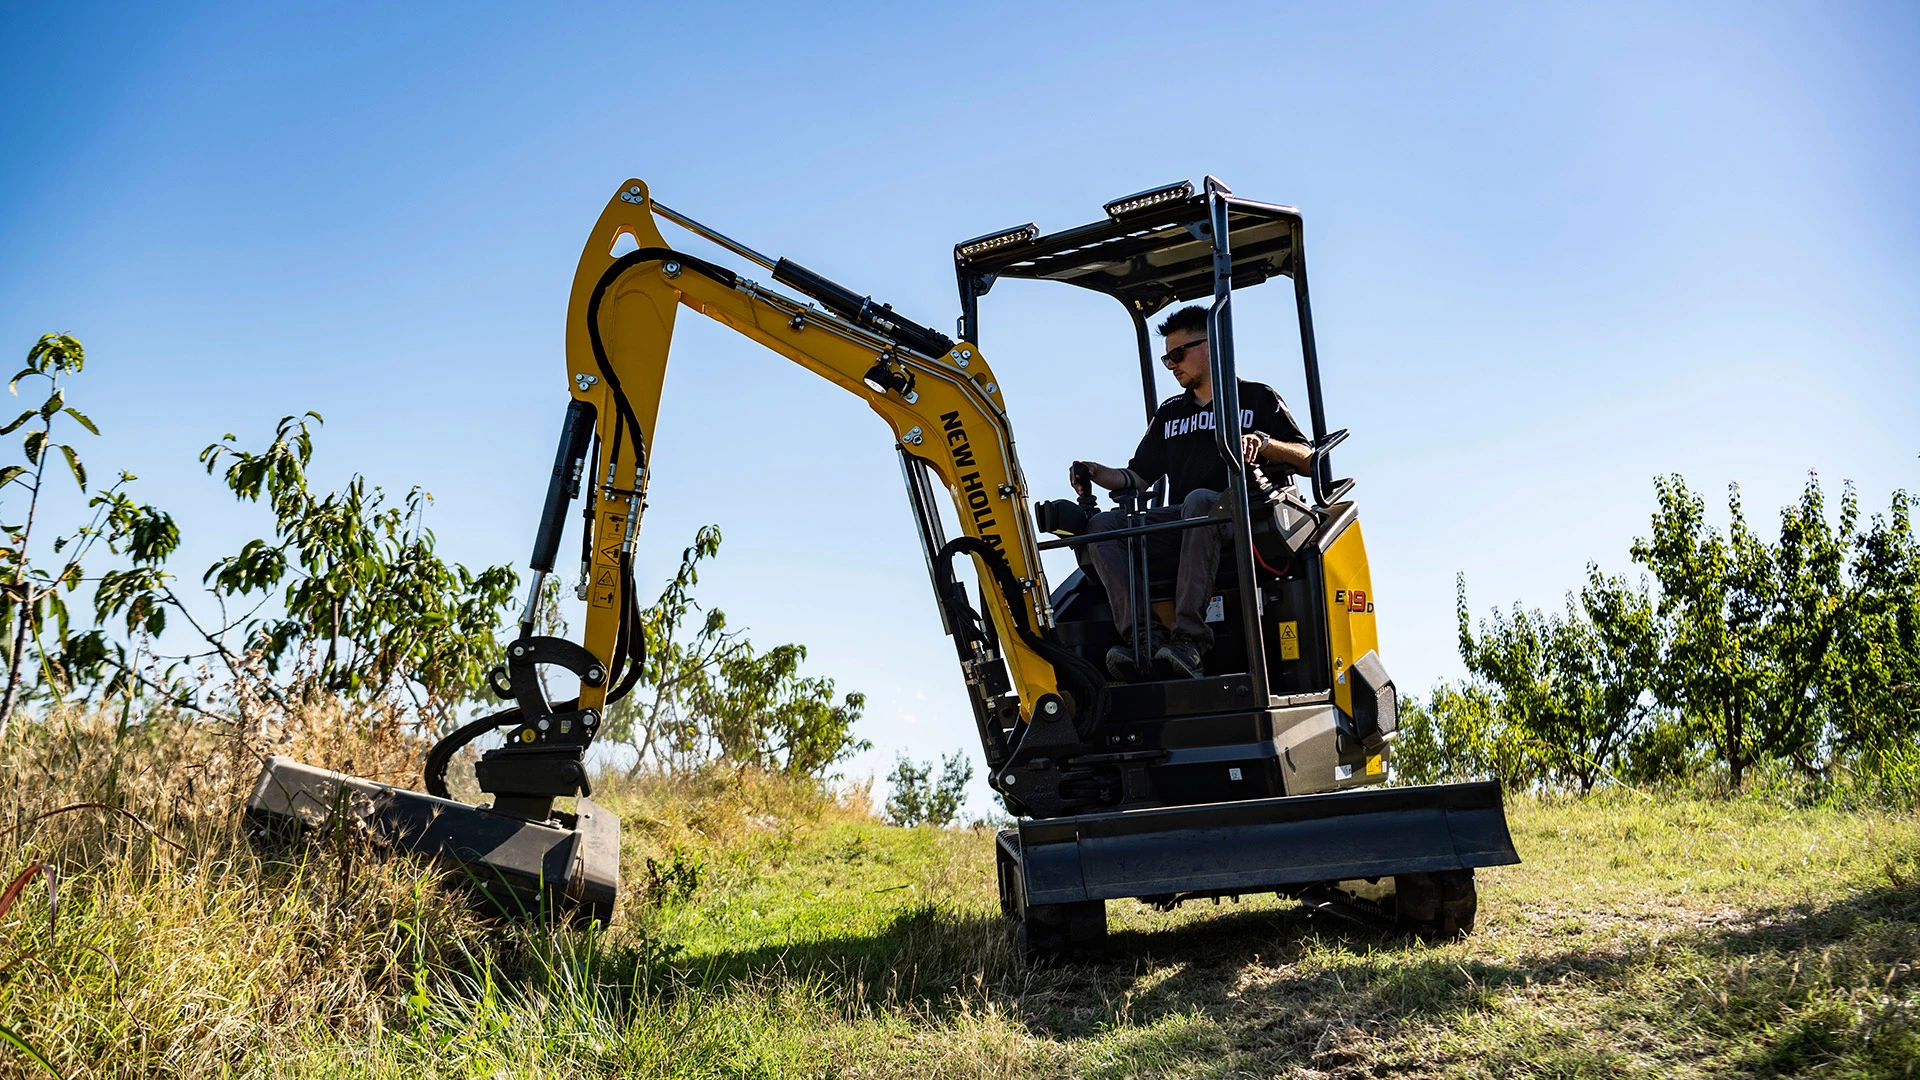 Operator in New Holland mini crawler excavator, working in field with clear blue sky backdrop.